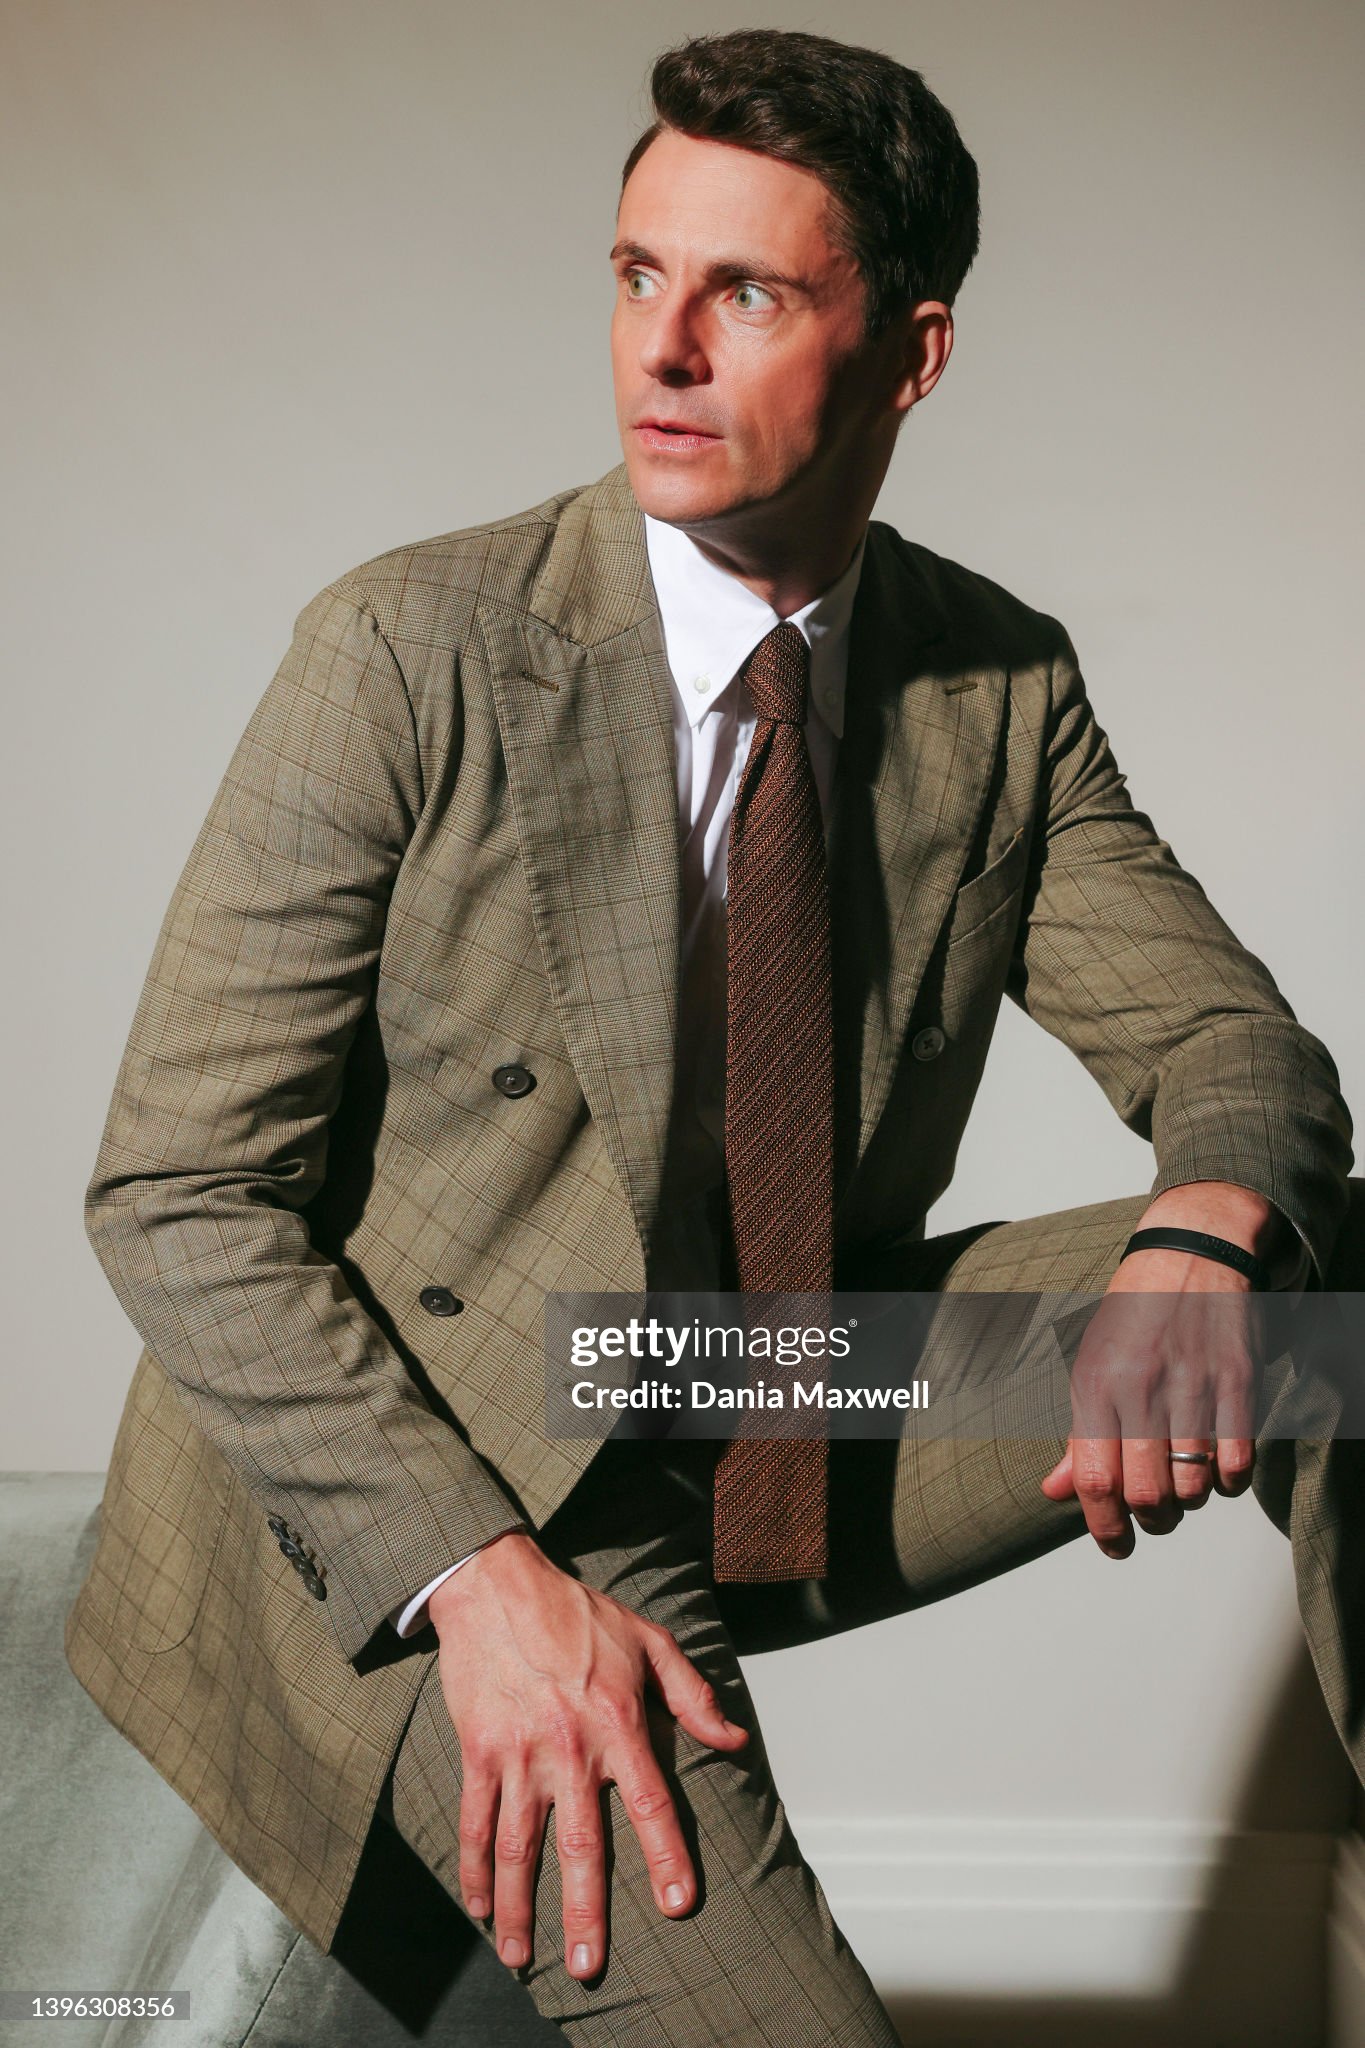 los-angeles-ca-actor-matthew-goode-is-photographed-for-los-angeles-times-on-april-20-2022-in.jpg